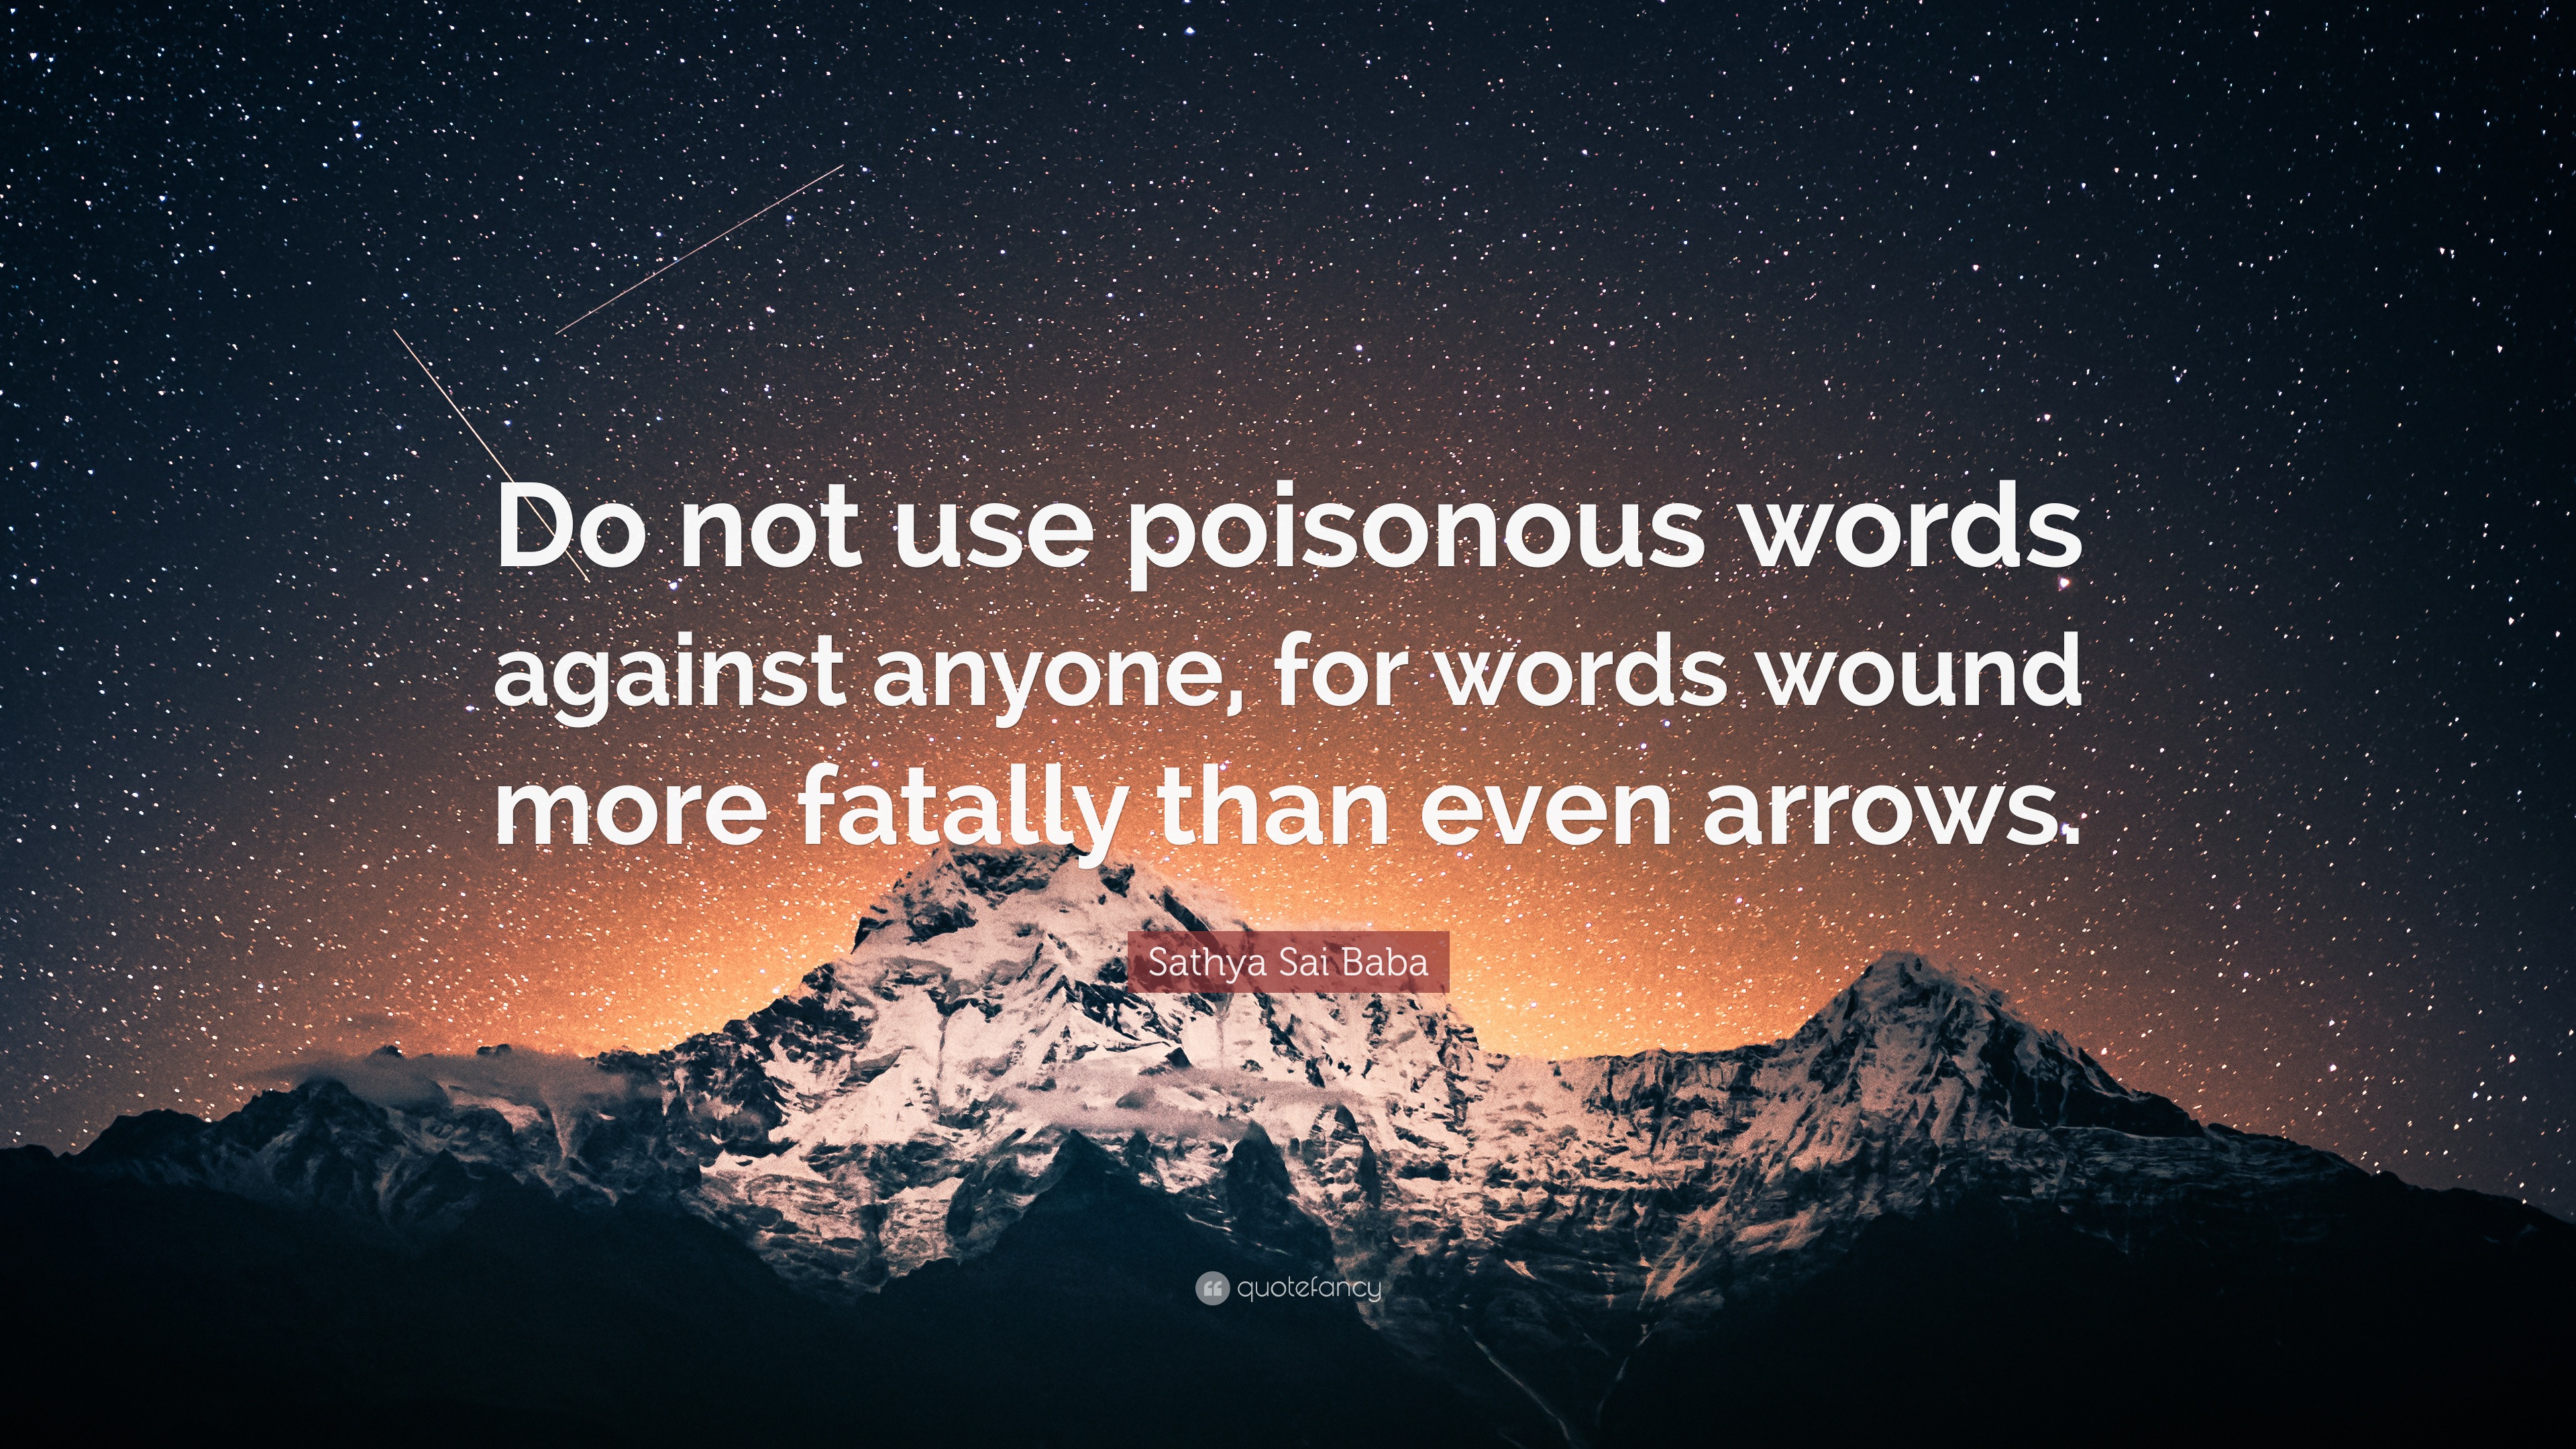 Sathya Sai Baba Quote: “Do not use poisonous words against anyone, for  words wound more fatally